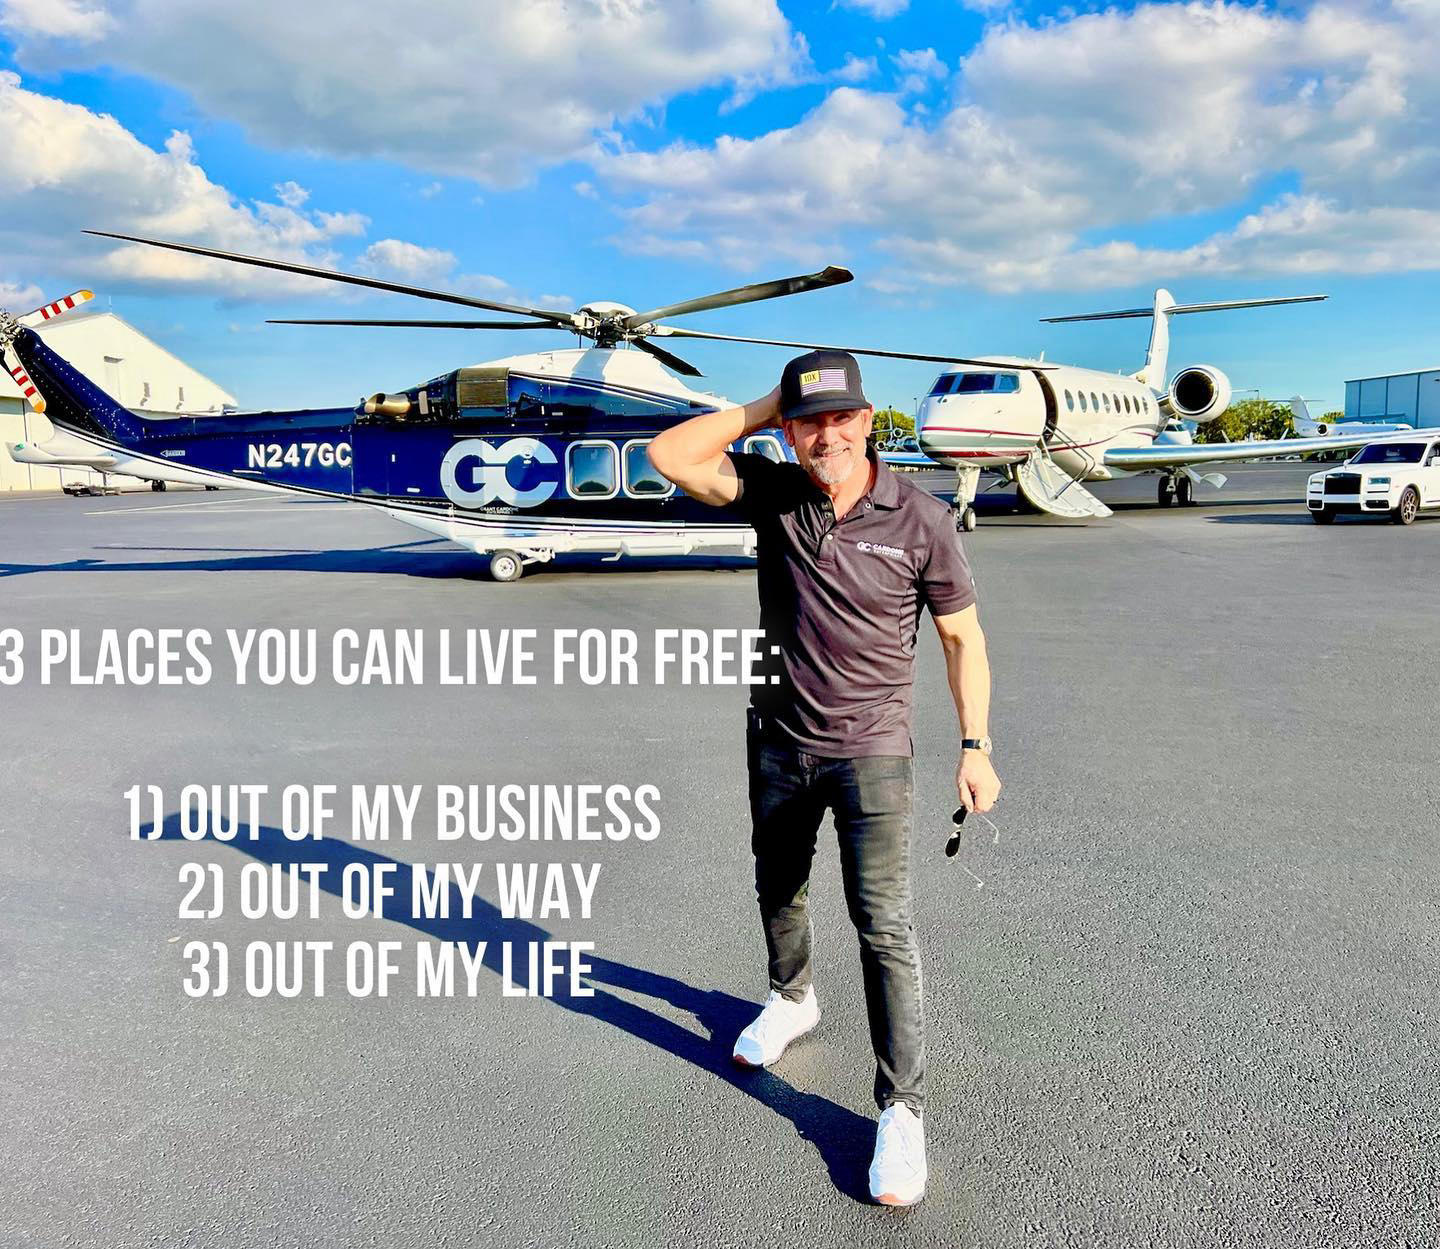 Grant Cardone - Three places to live for free Share it